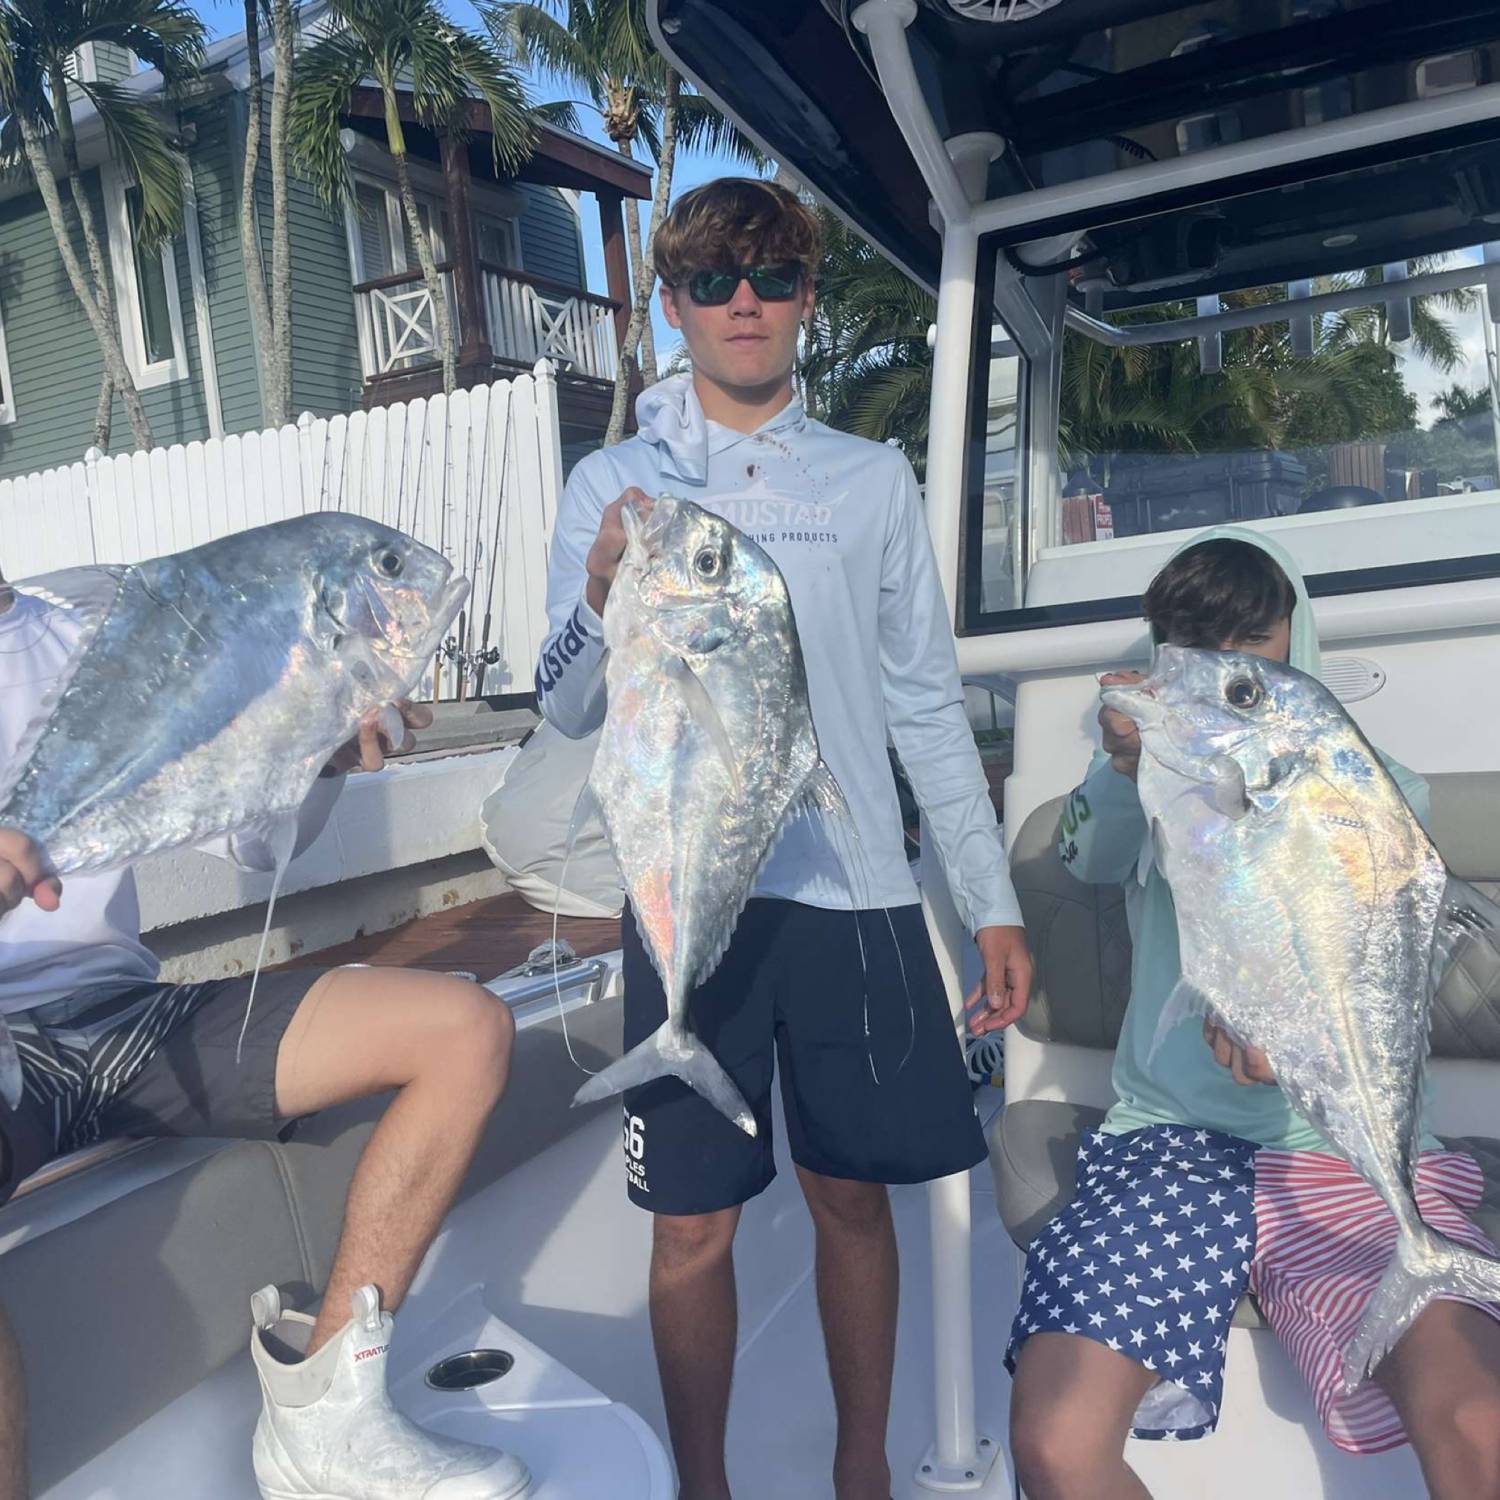 3 African Pompano caught off the coast of the Gulf of Mexico. Wonderful day of fishing overall, and the Sportsman...